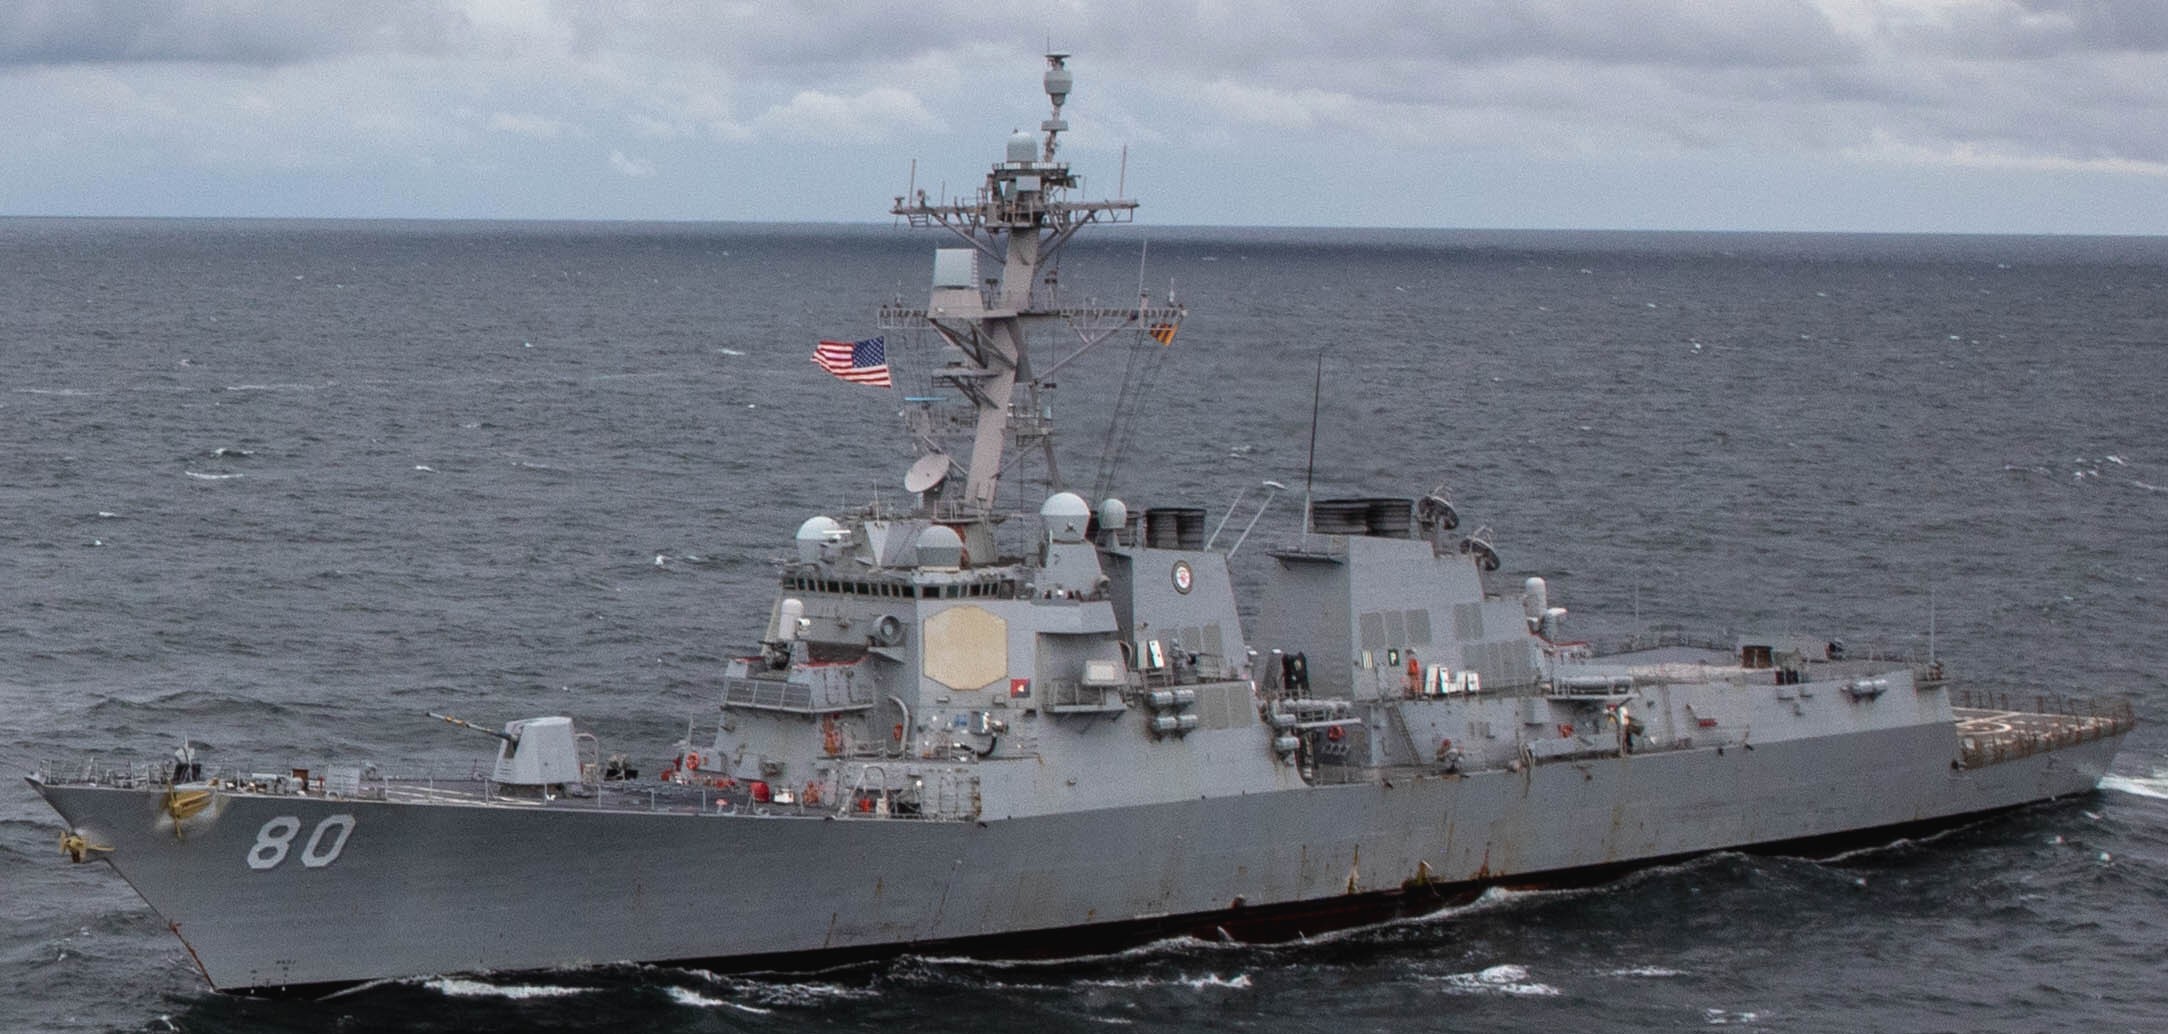 ddg-80 uss roosevelt guided missile destroyer arleigh burke class us navy baltic sea 94